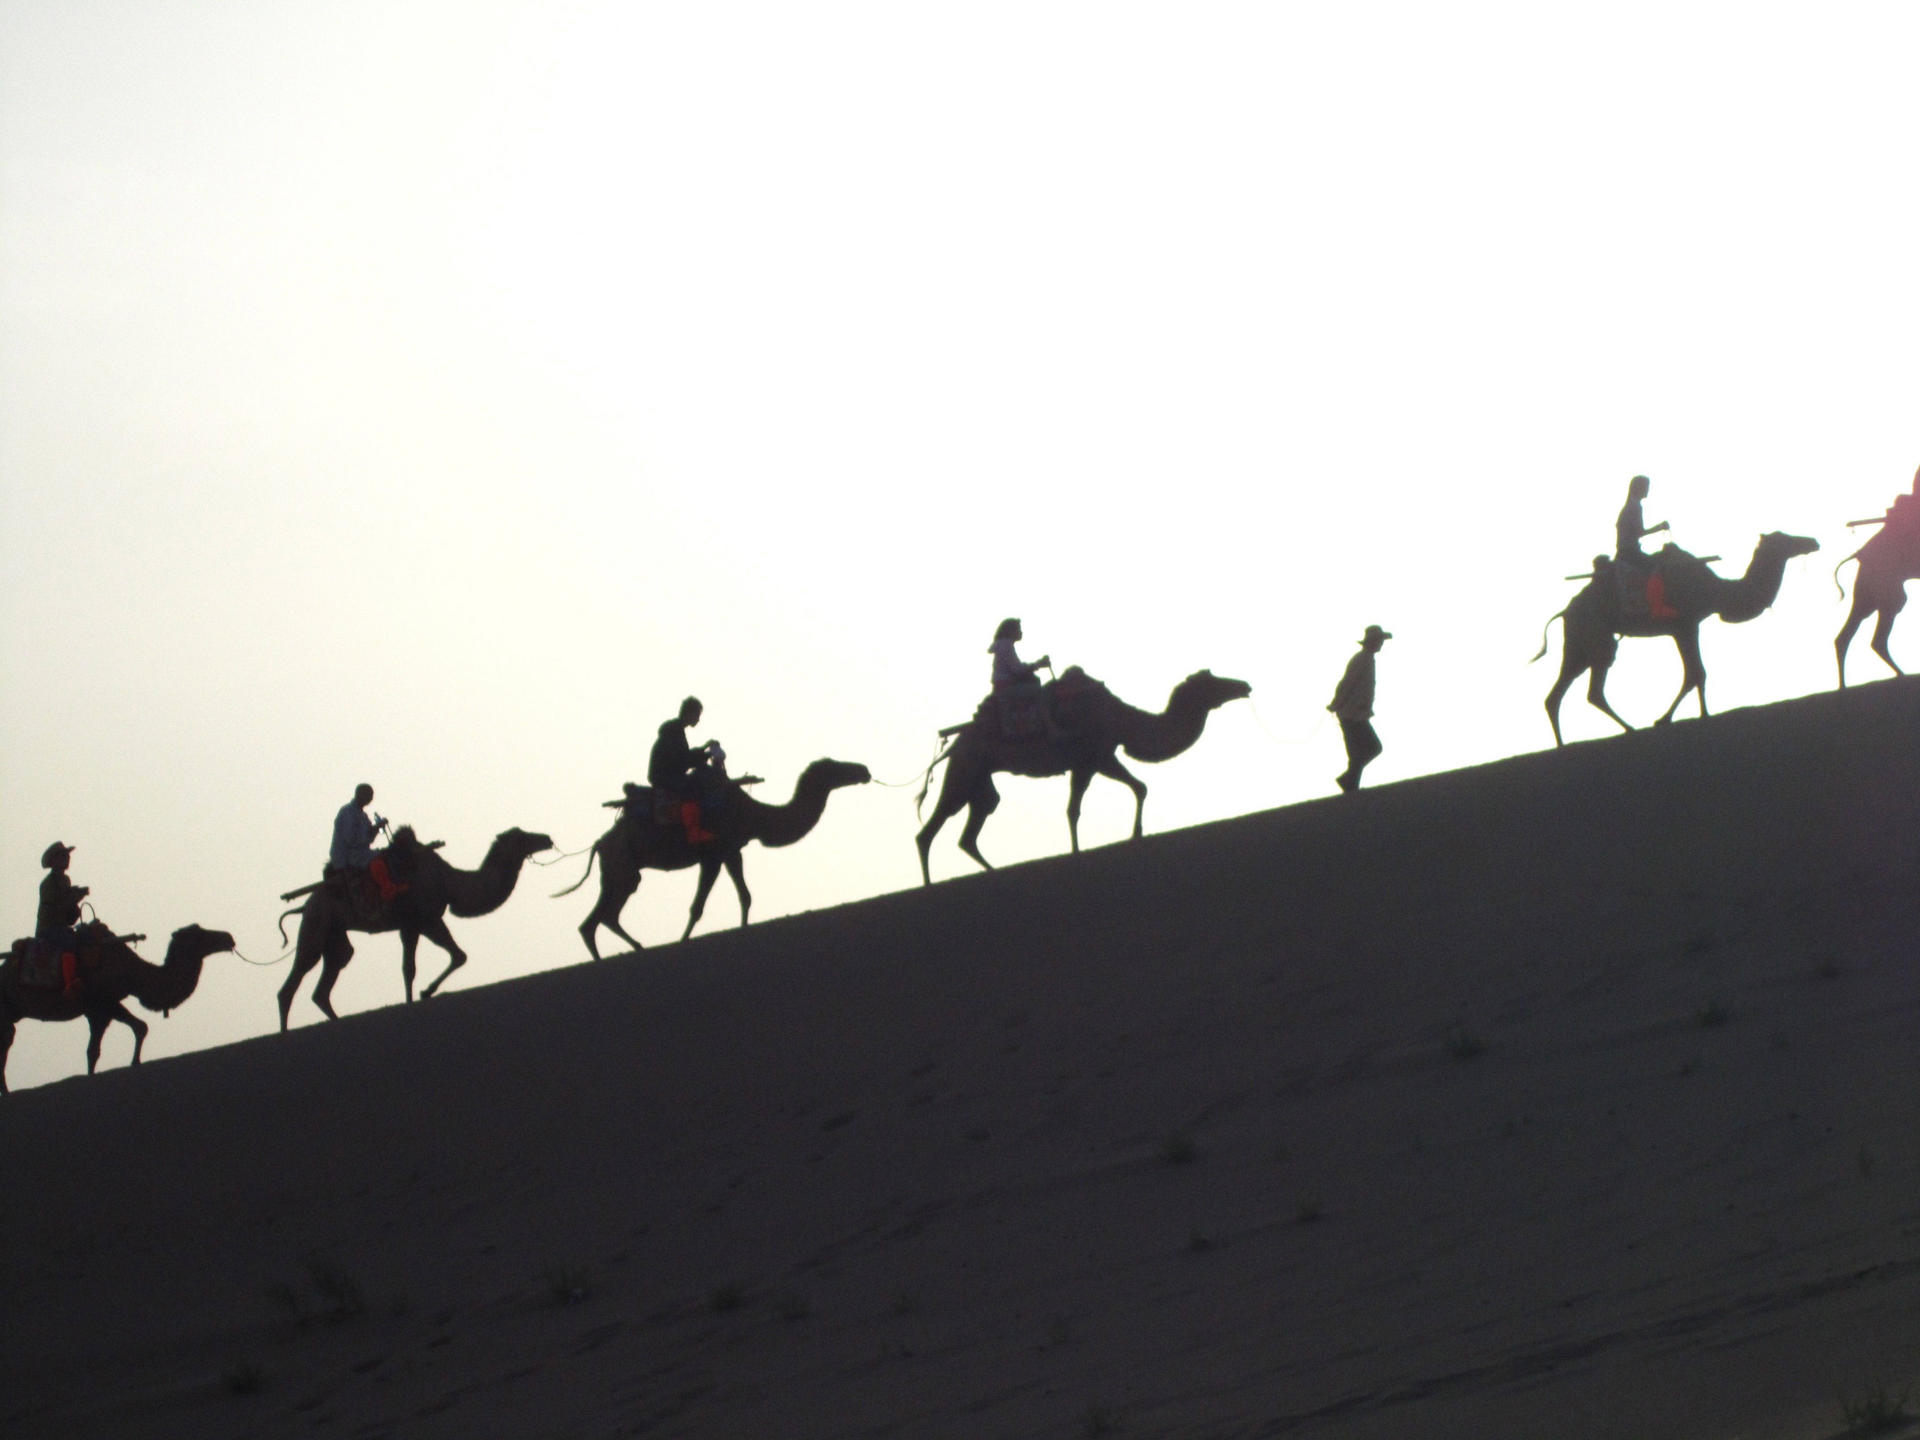 Rush hour: flocking to the sights in Dunhuang. Photo: Cecilie Gamst Berg